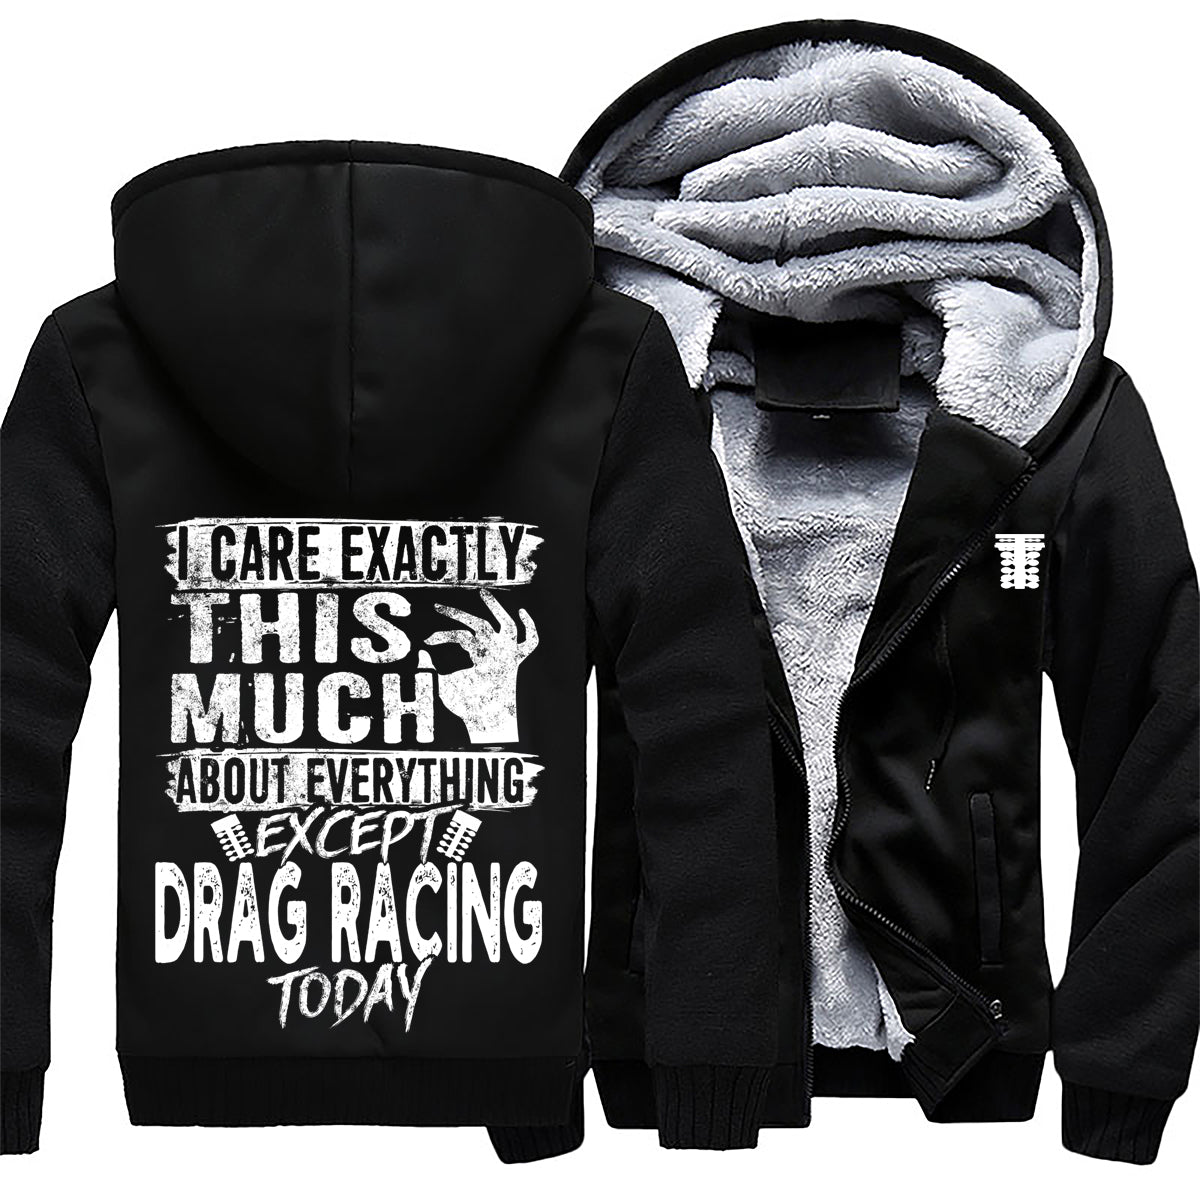 I Care Exactly This Much About Anything Except Drag Racing Today Jacket